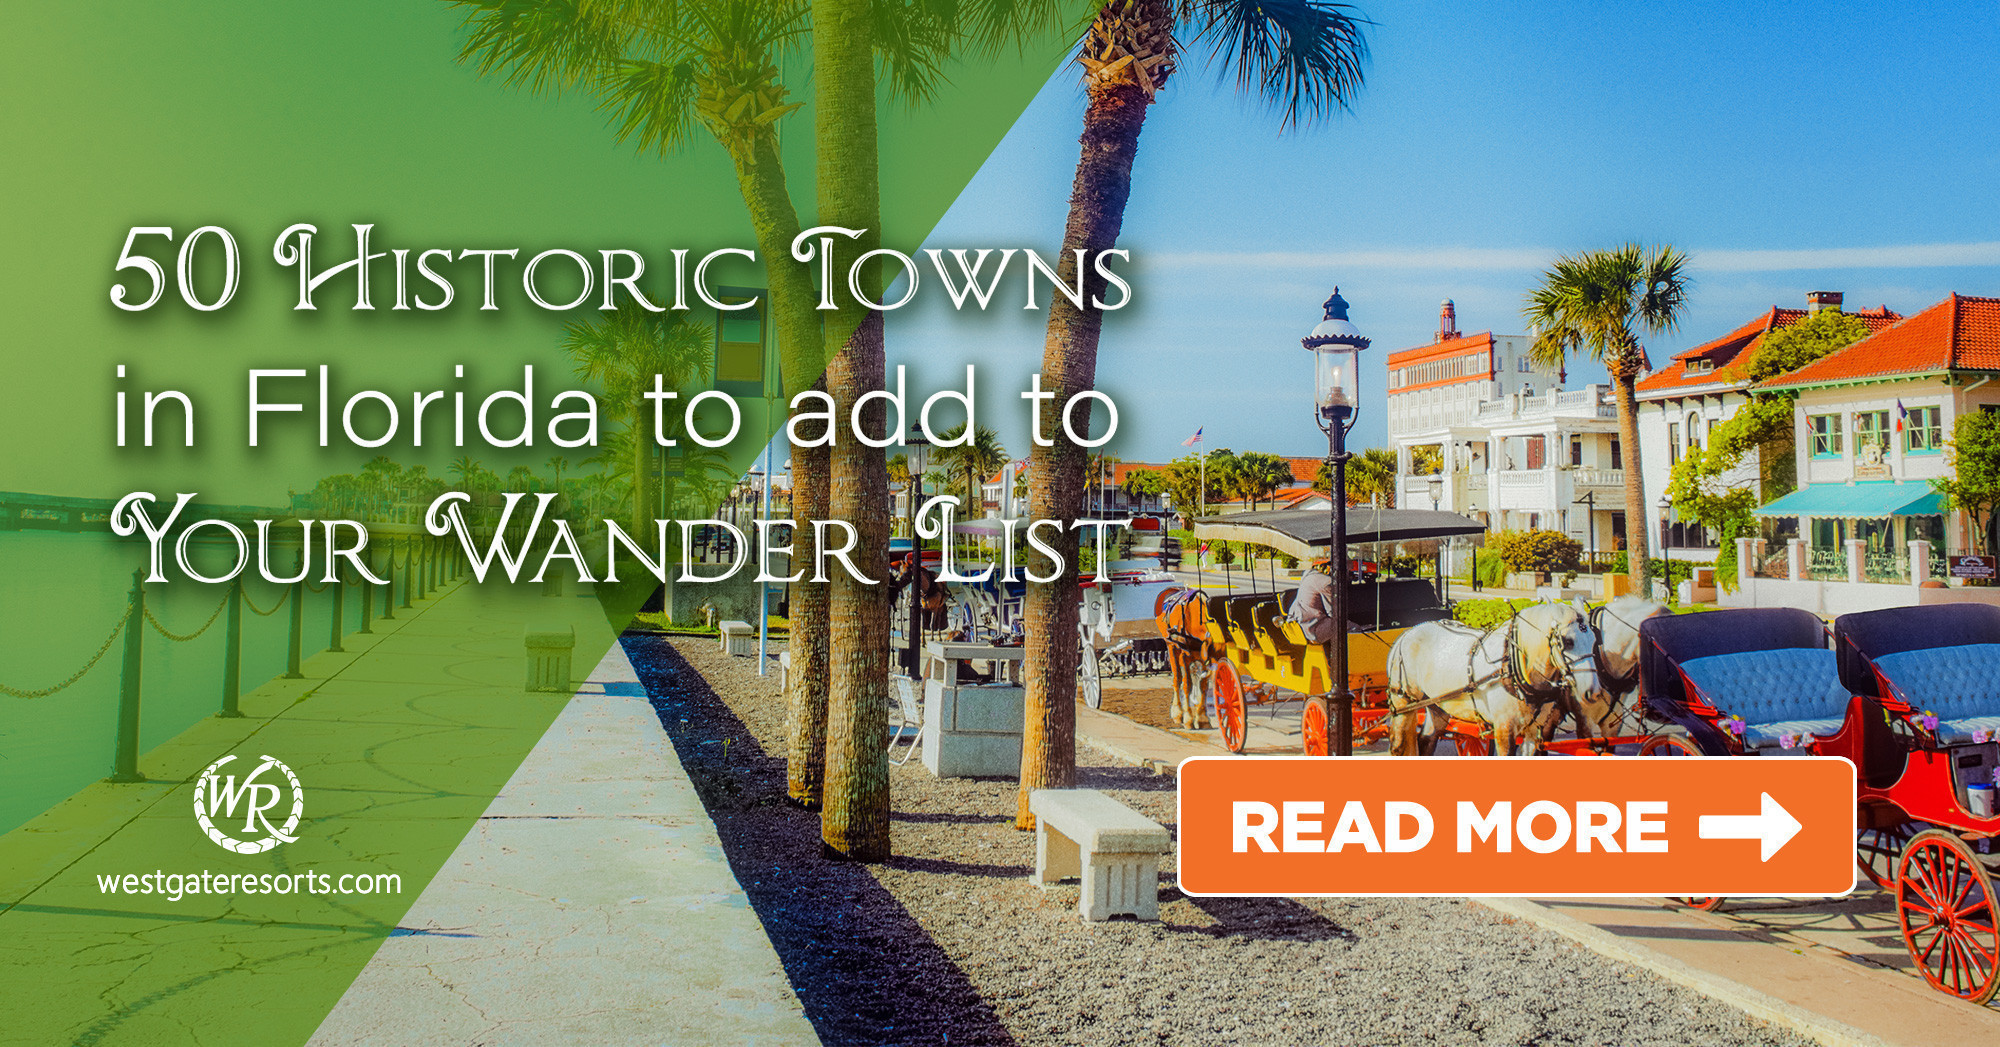  50 Historic Towns in Florida for Your Wander List! 